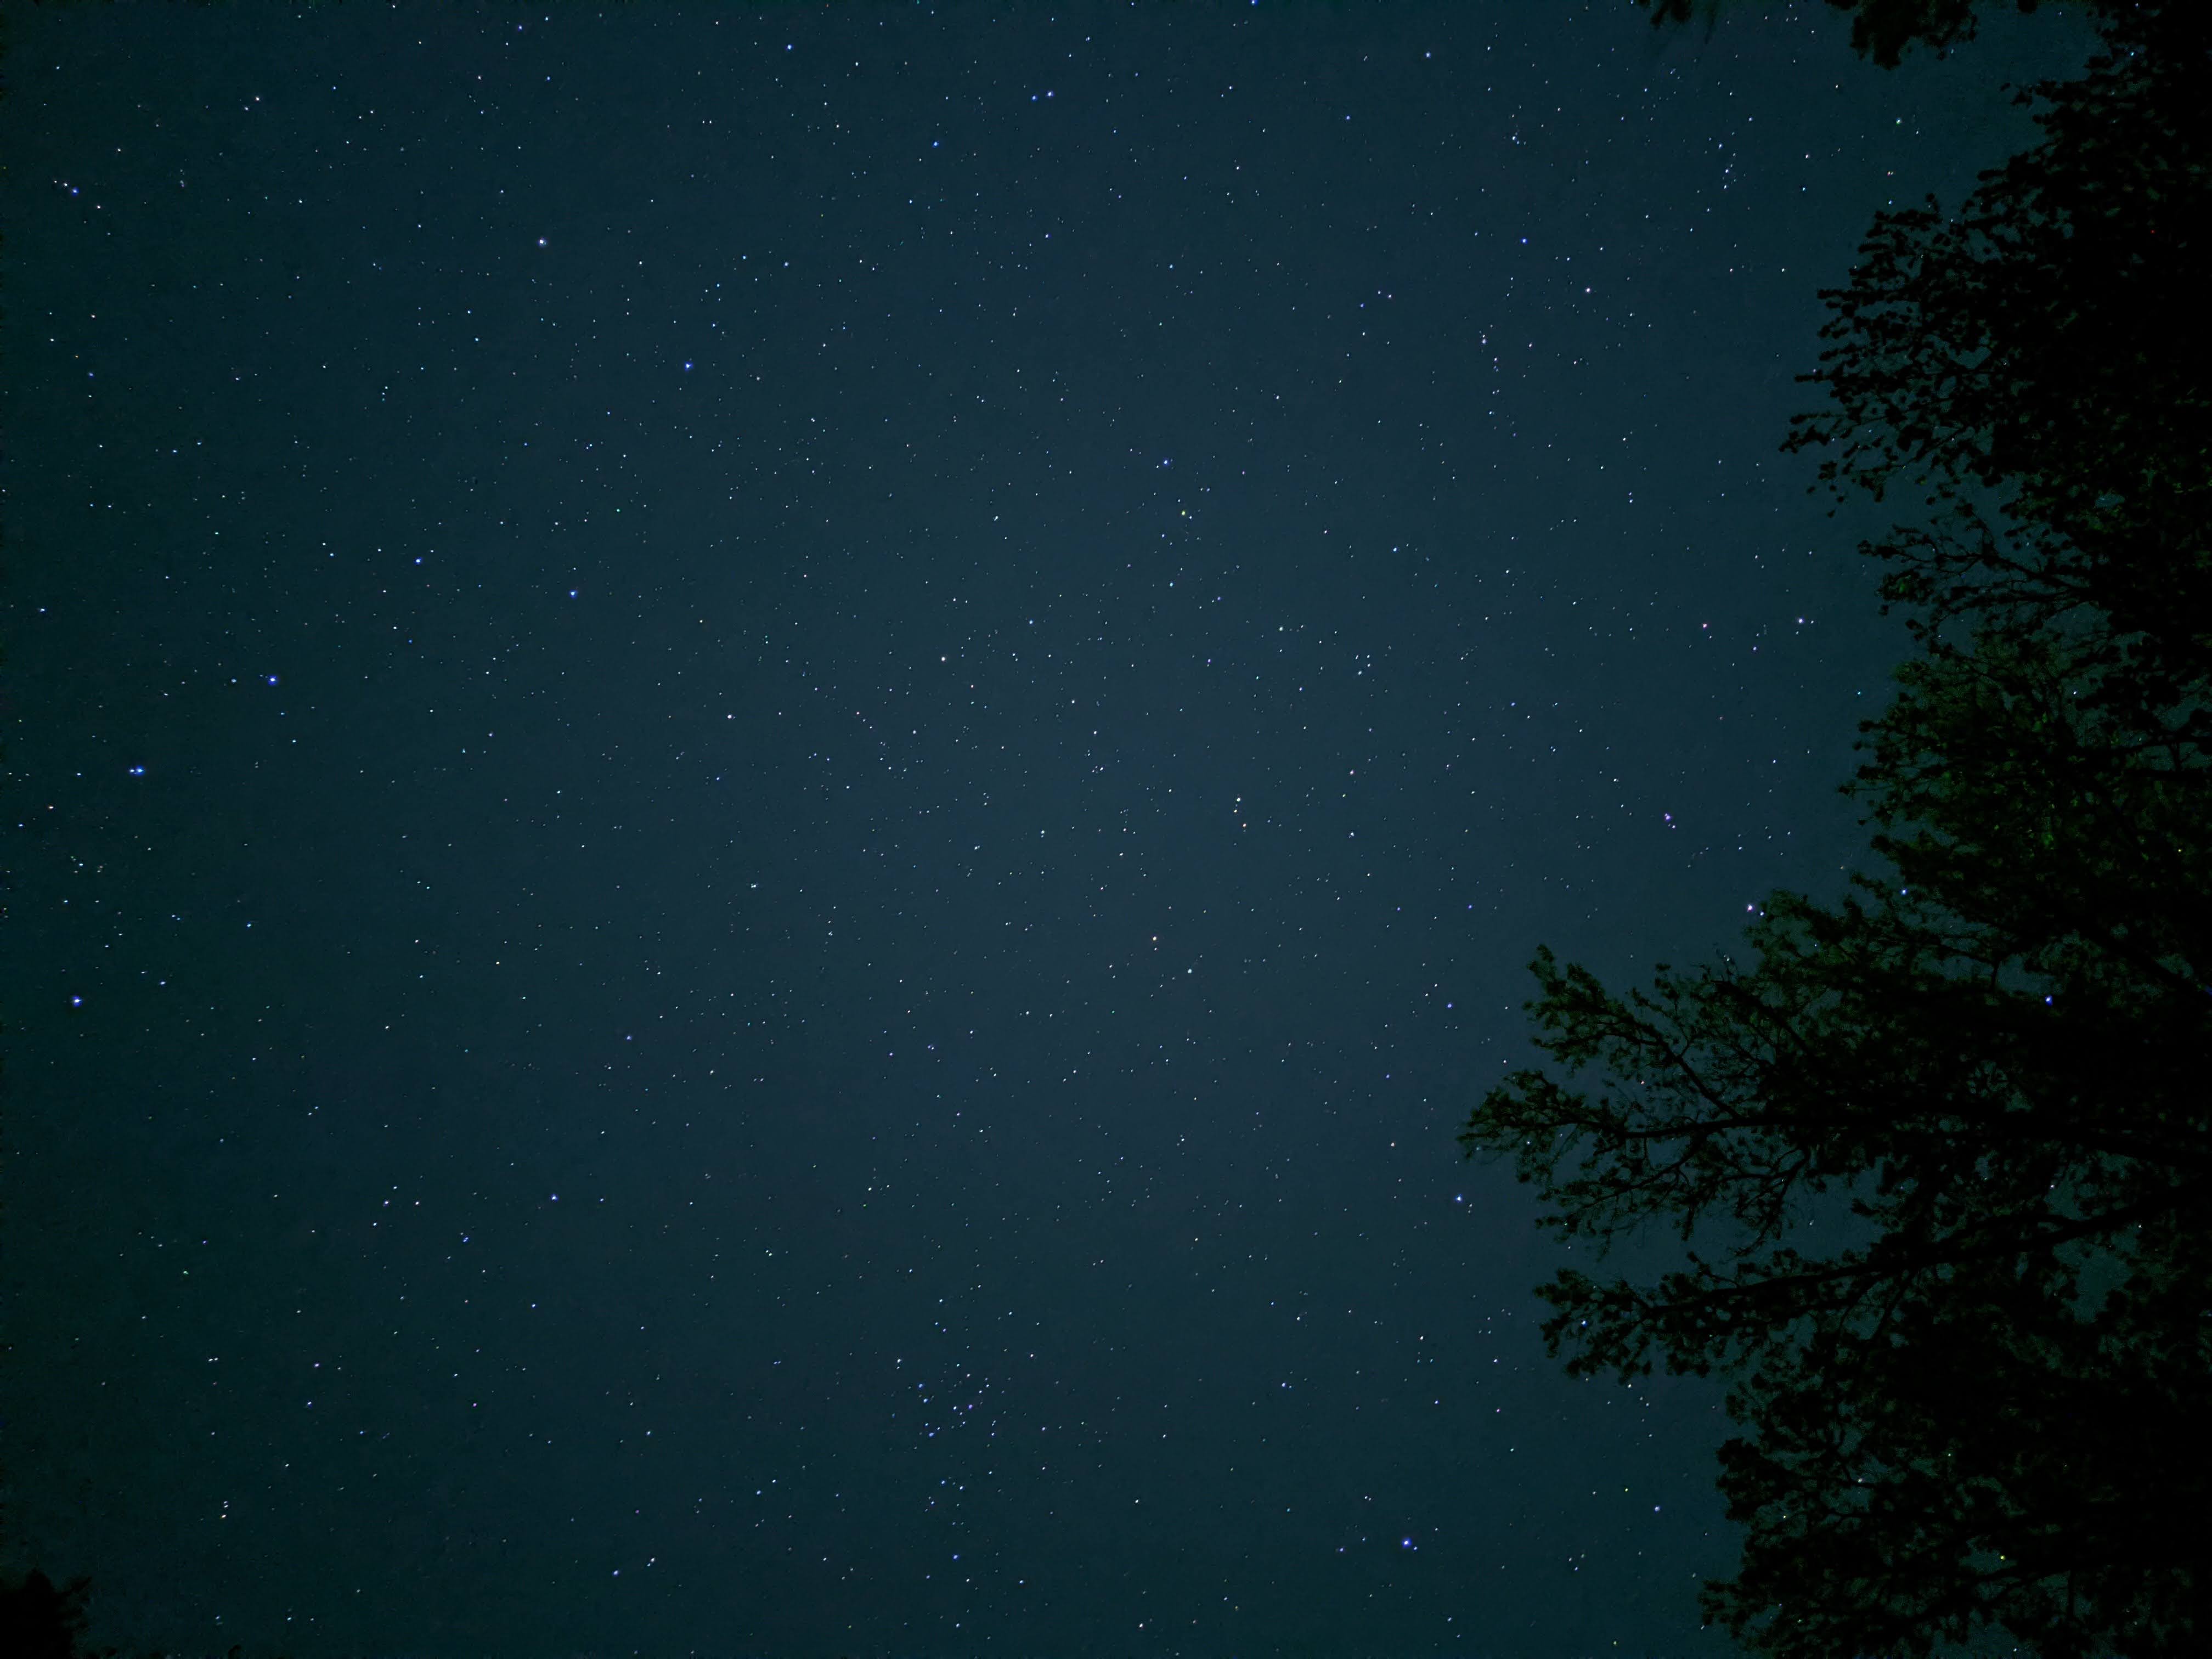 The following Pixel Feature Drop could take astrophotography to a higher level